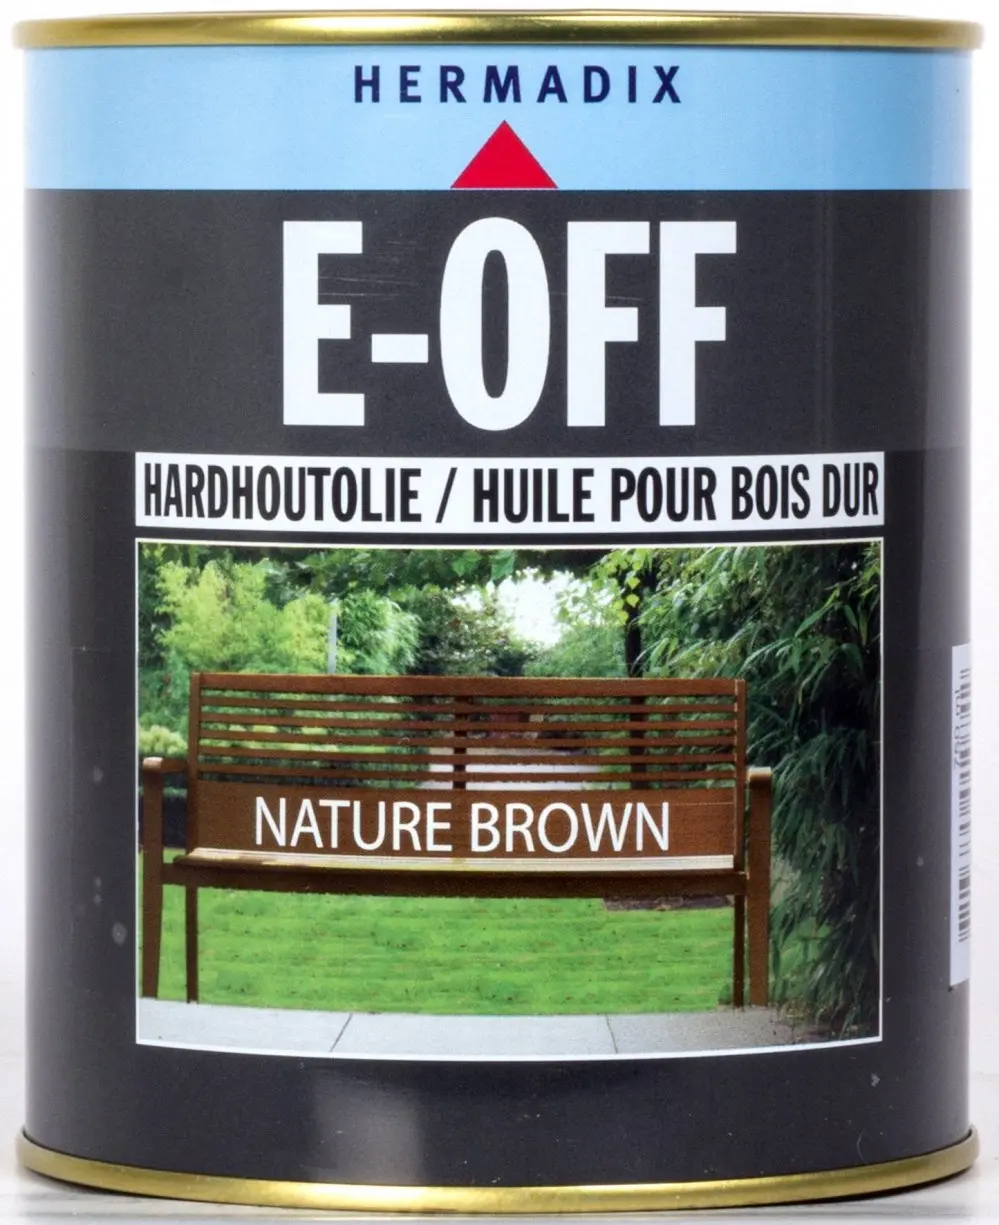 Houtolie - e-off-nature-brown-verfcompleet